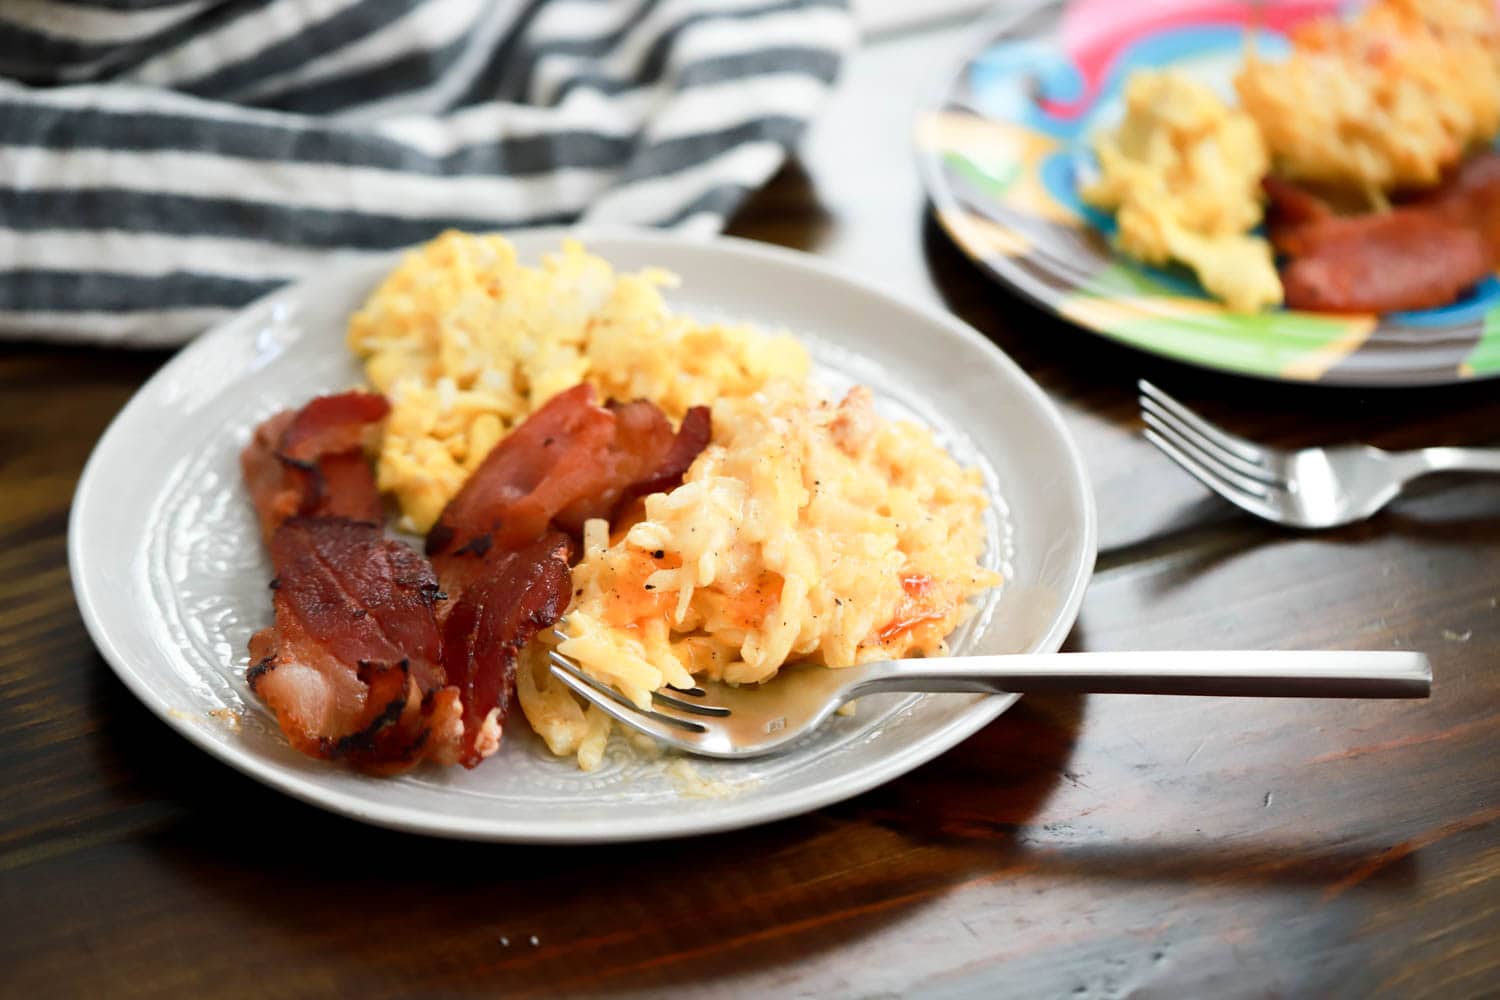 Plate with small fork, bacon, eggs, and hashbrown casserole on table.